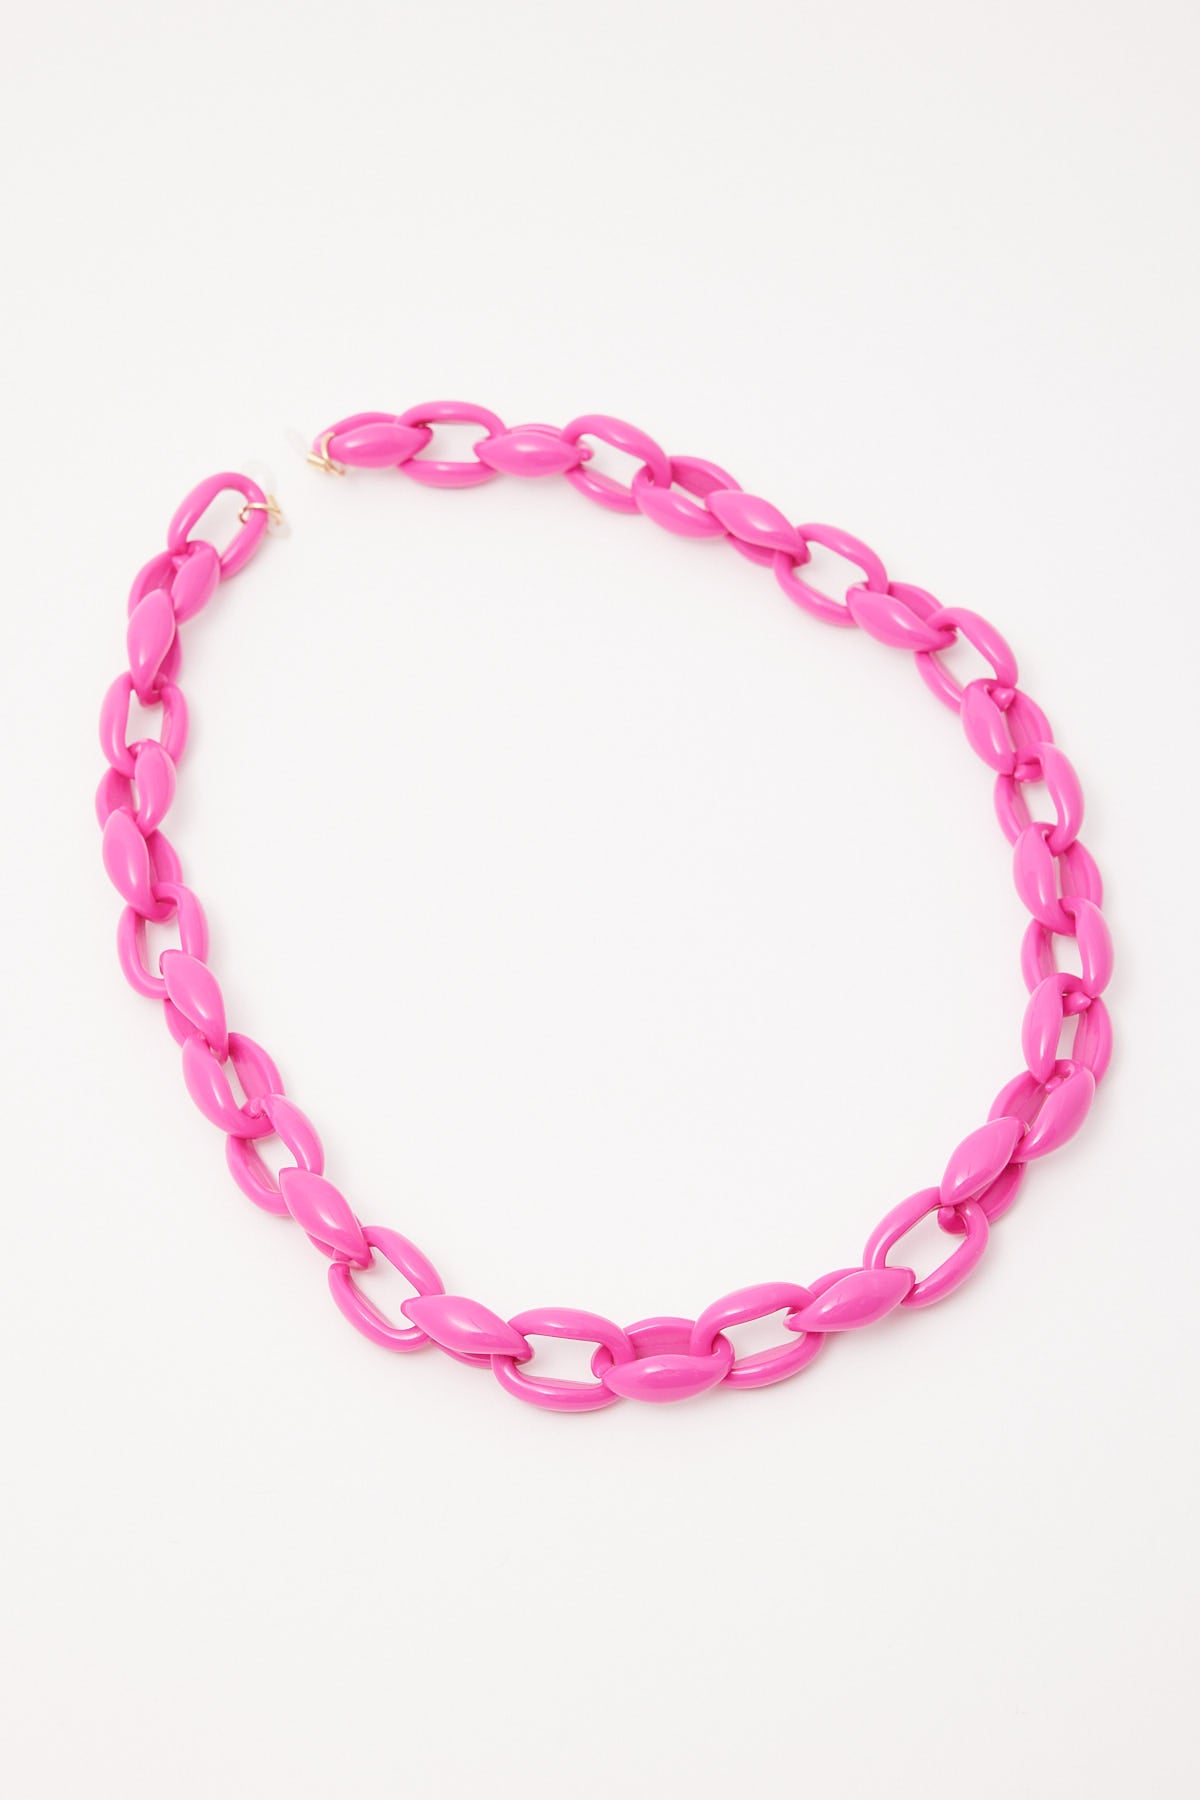 Aire Aire Oval Sunglasses Chain Pink